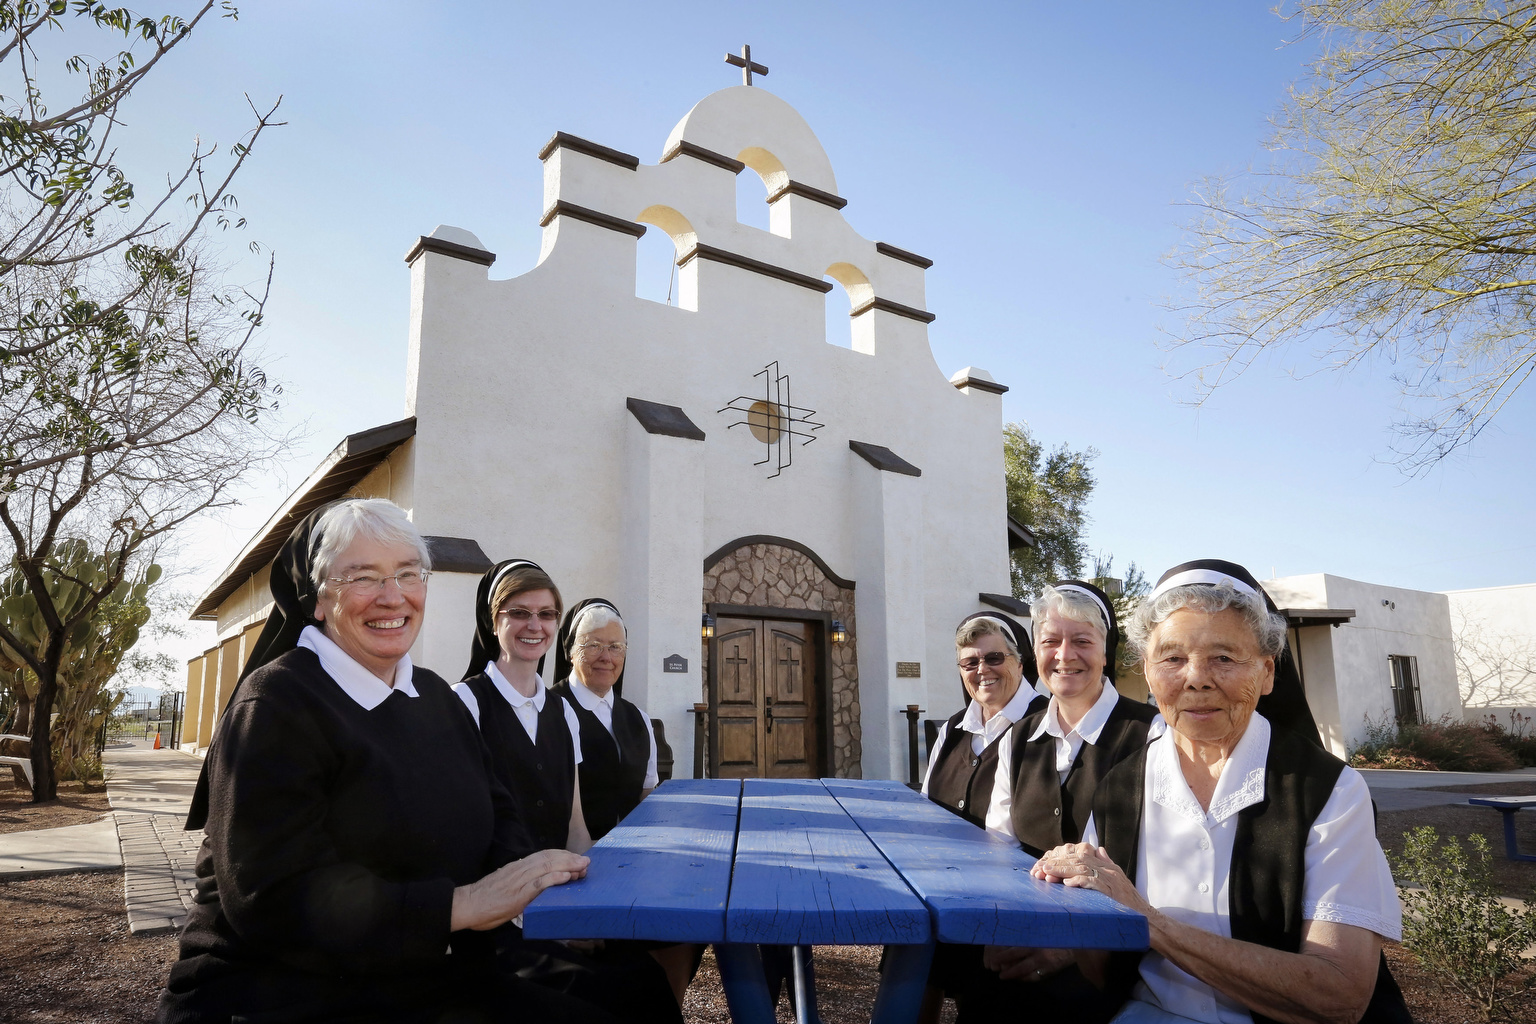 The Franciscan Sisters of Christian Charity serving St. Peter Indian Mission School in Bapchule will receive the “Guardian of Hope” award at this year’s Night of Hope. From left are Sisters Martha Mary Carpenter, Pamela Catherine Peasel, Barbara Jean Butler, Carol Mathe, Maria Goretti Scandaliato and Thereselle Arruda. Not pictured Sr. Hannah. (Nancy Wiechec/CNS)